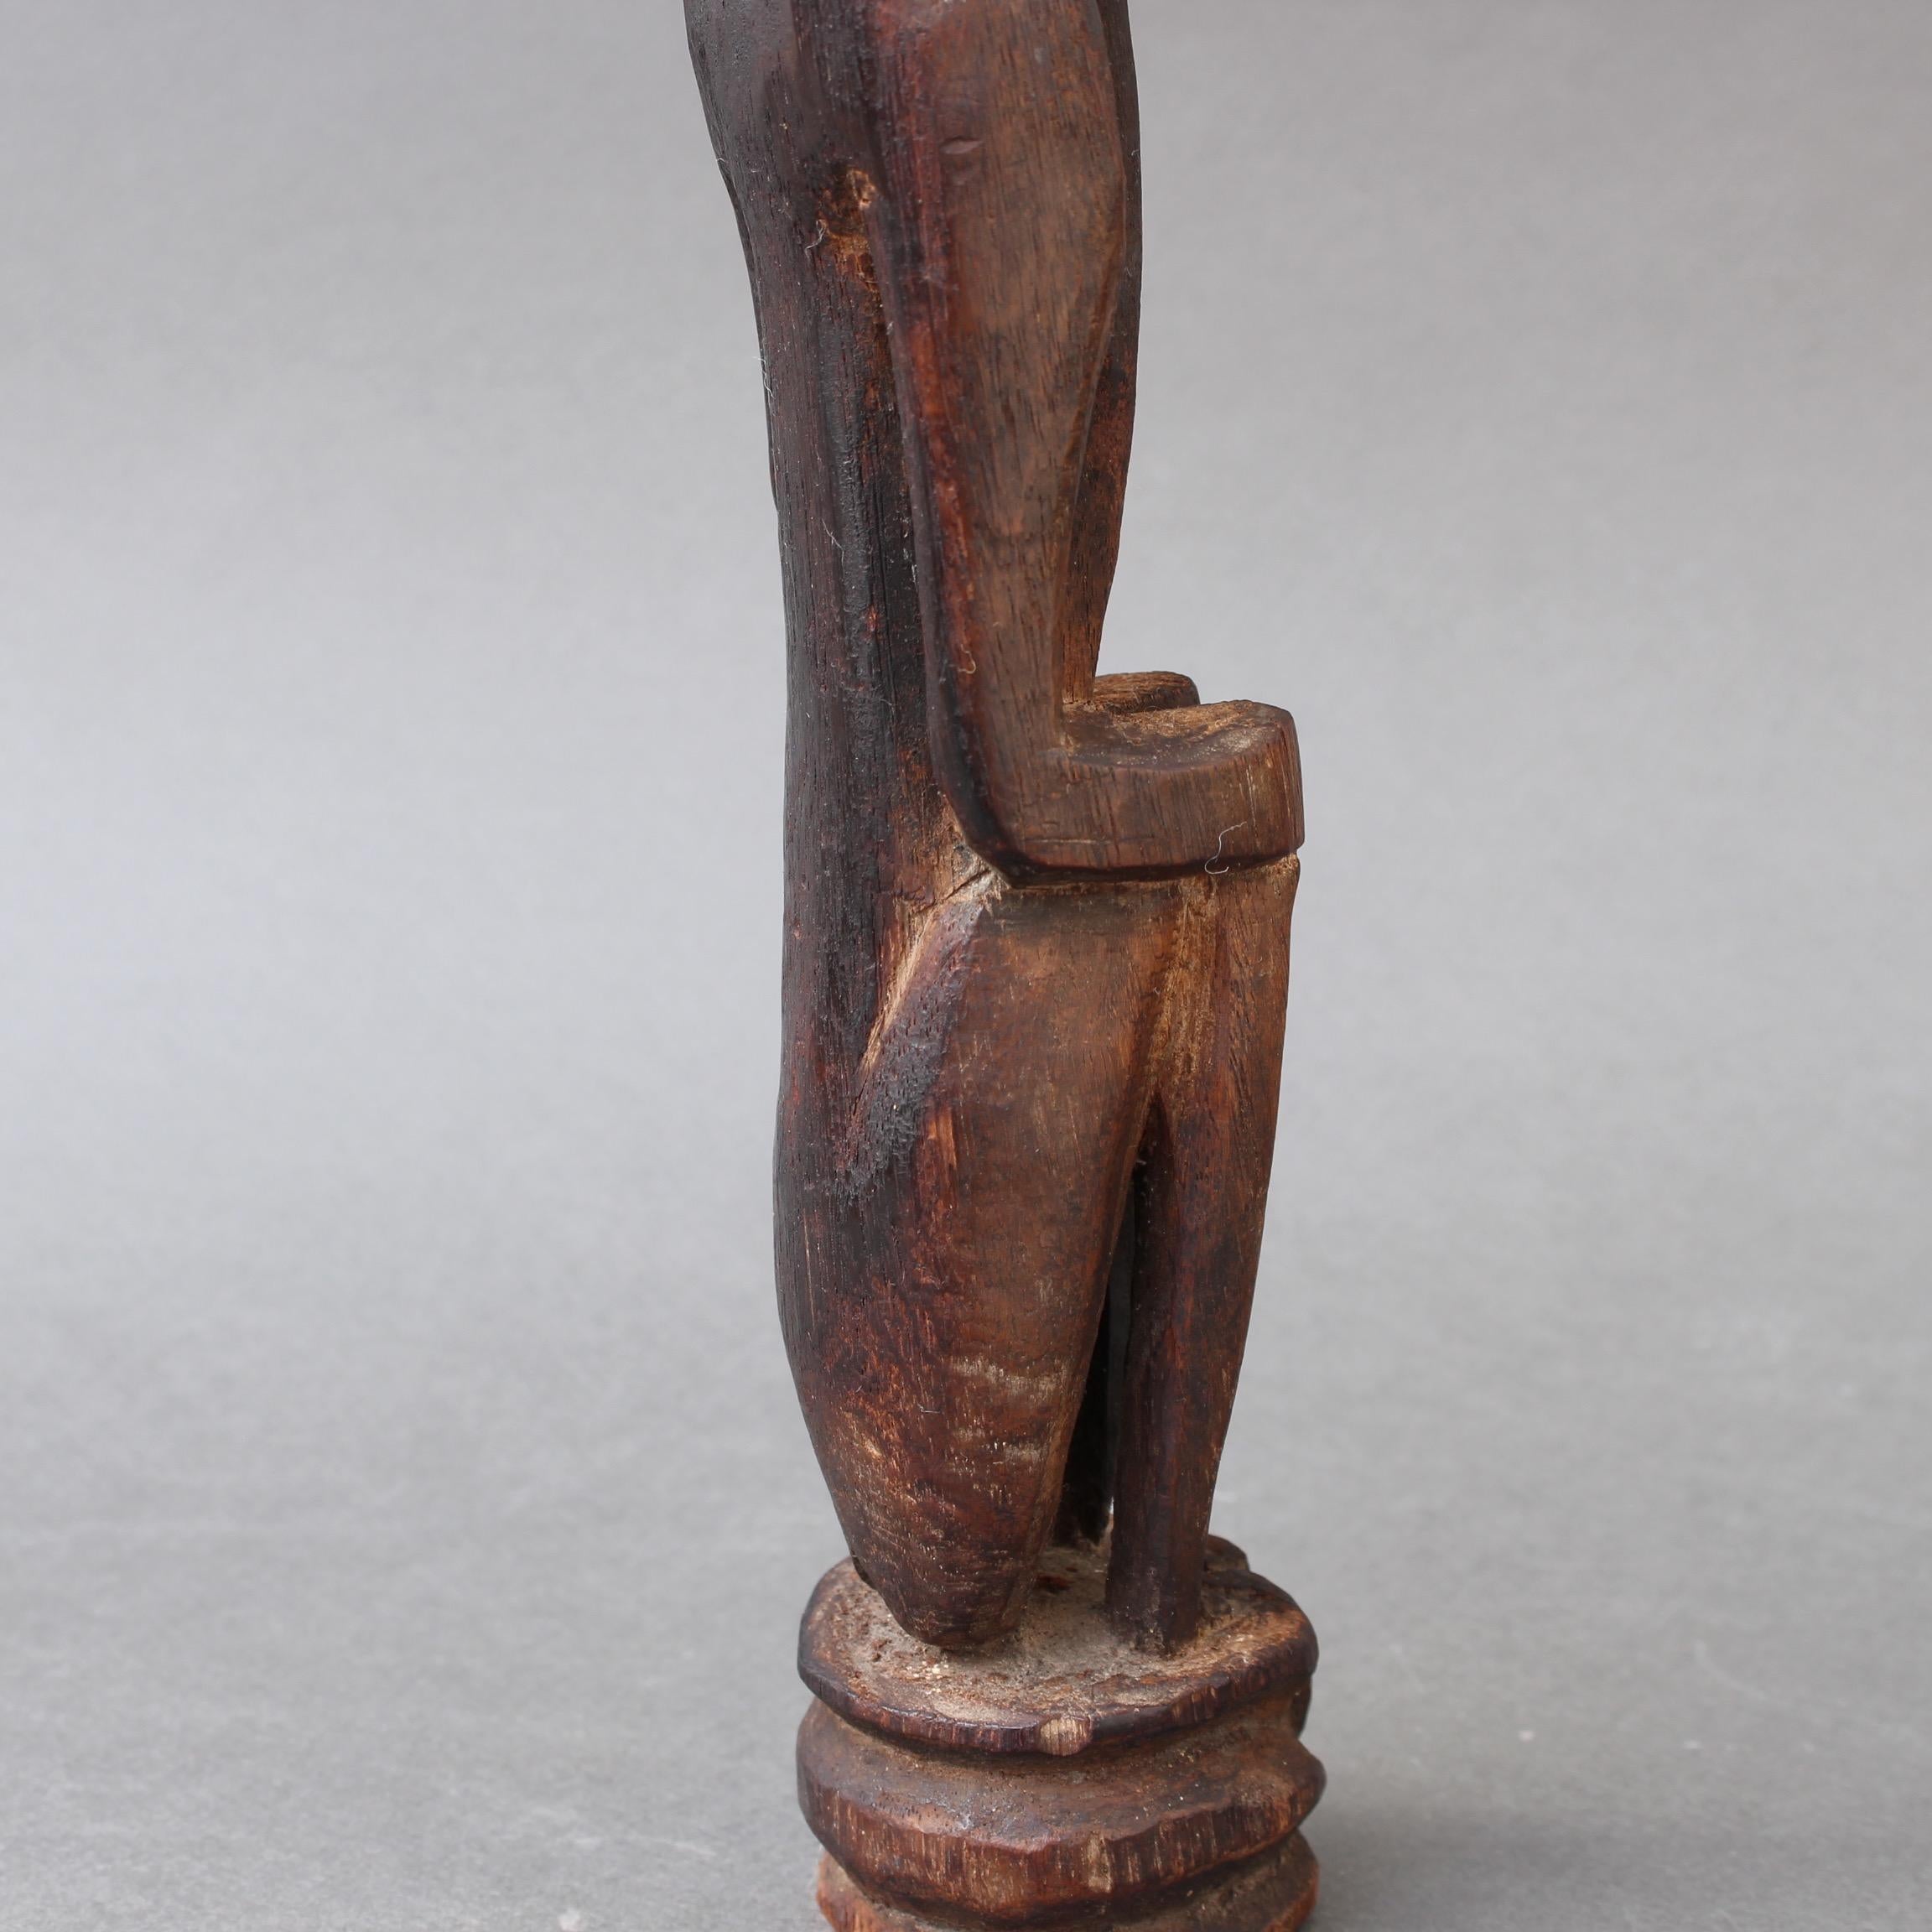 Wooden Sculpture or Carving of Sitting Figure from Sumba Island, Indonesia 10